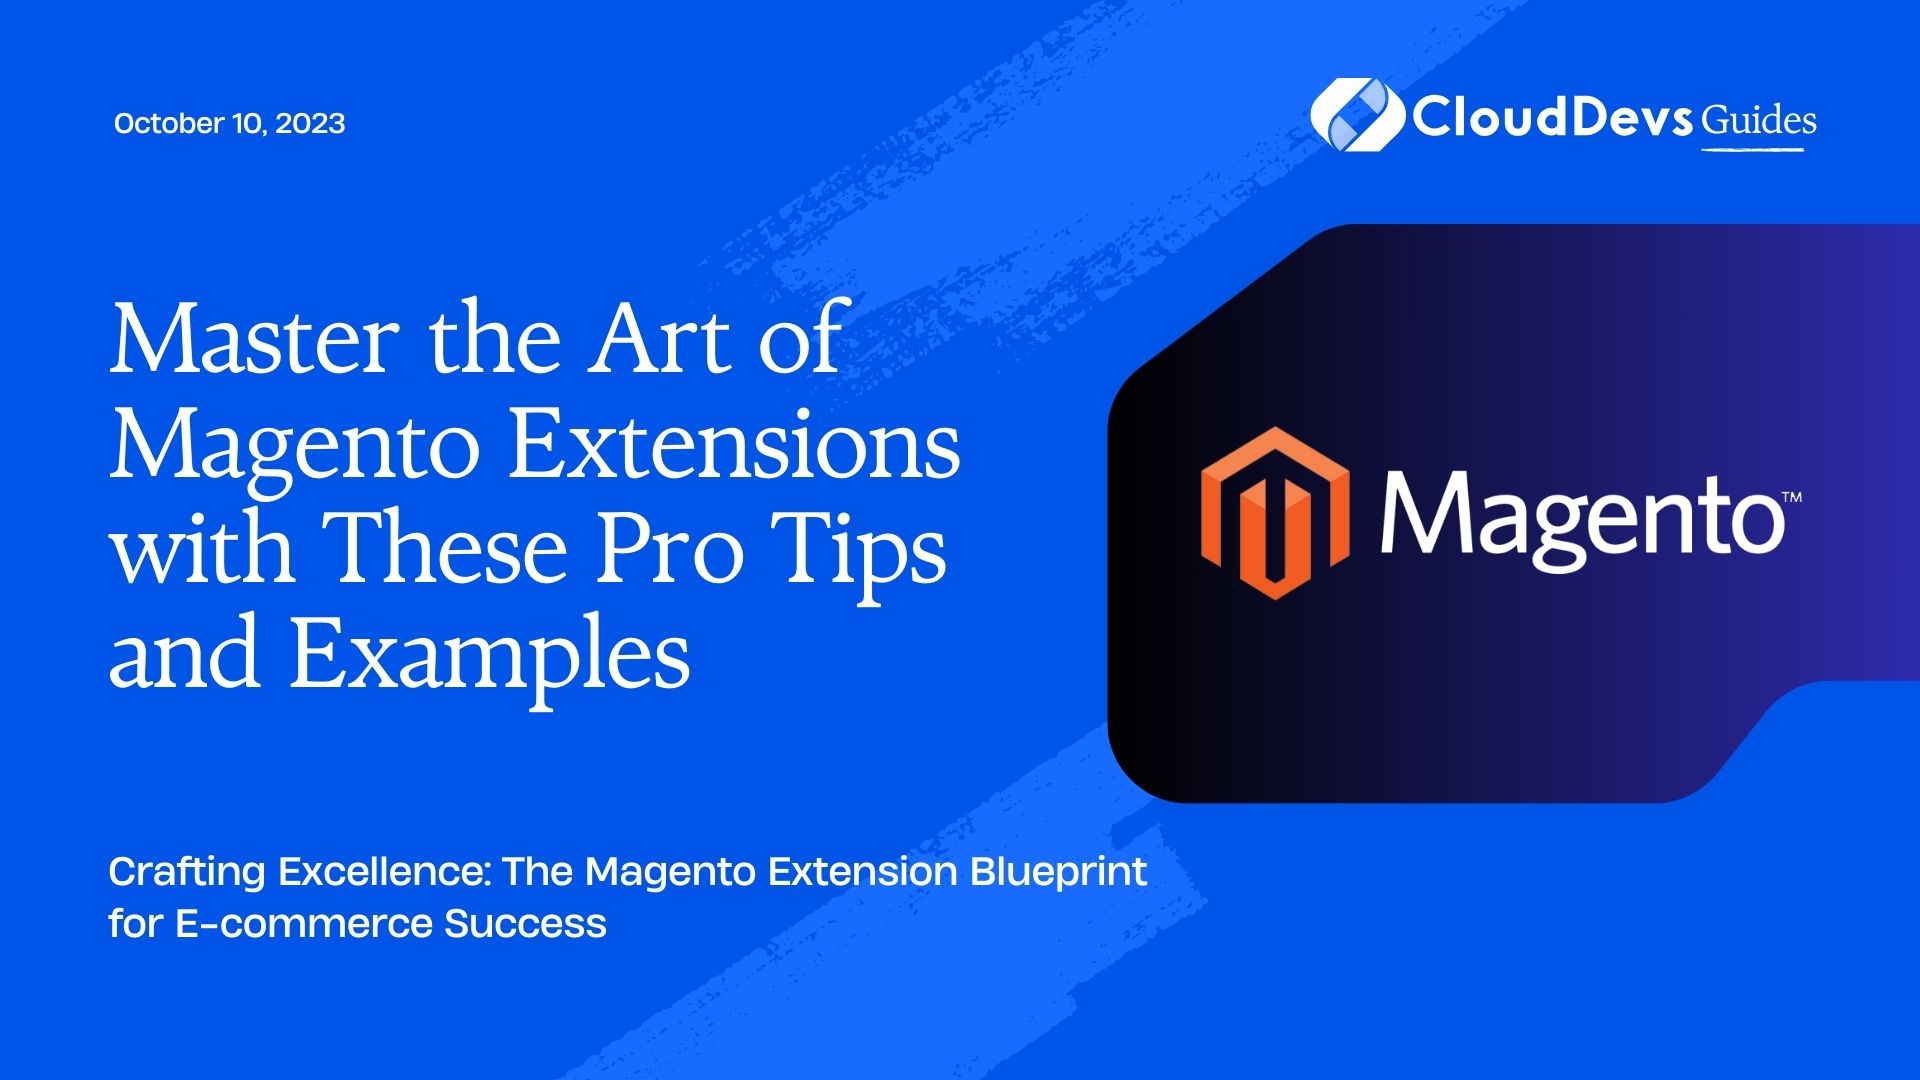 Master the Art of Magento Extensions with These Pro Tips and Examples